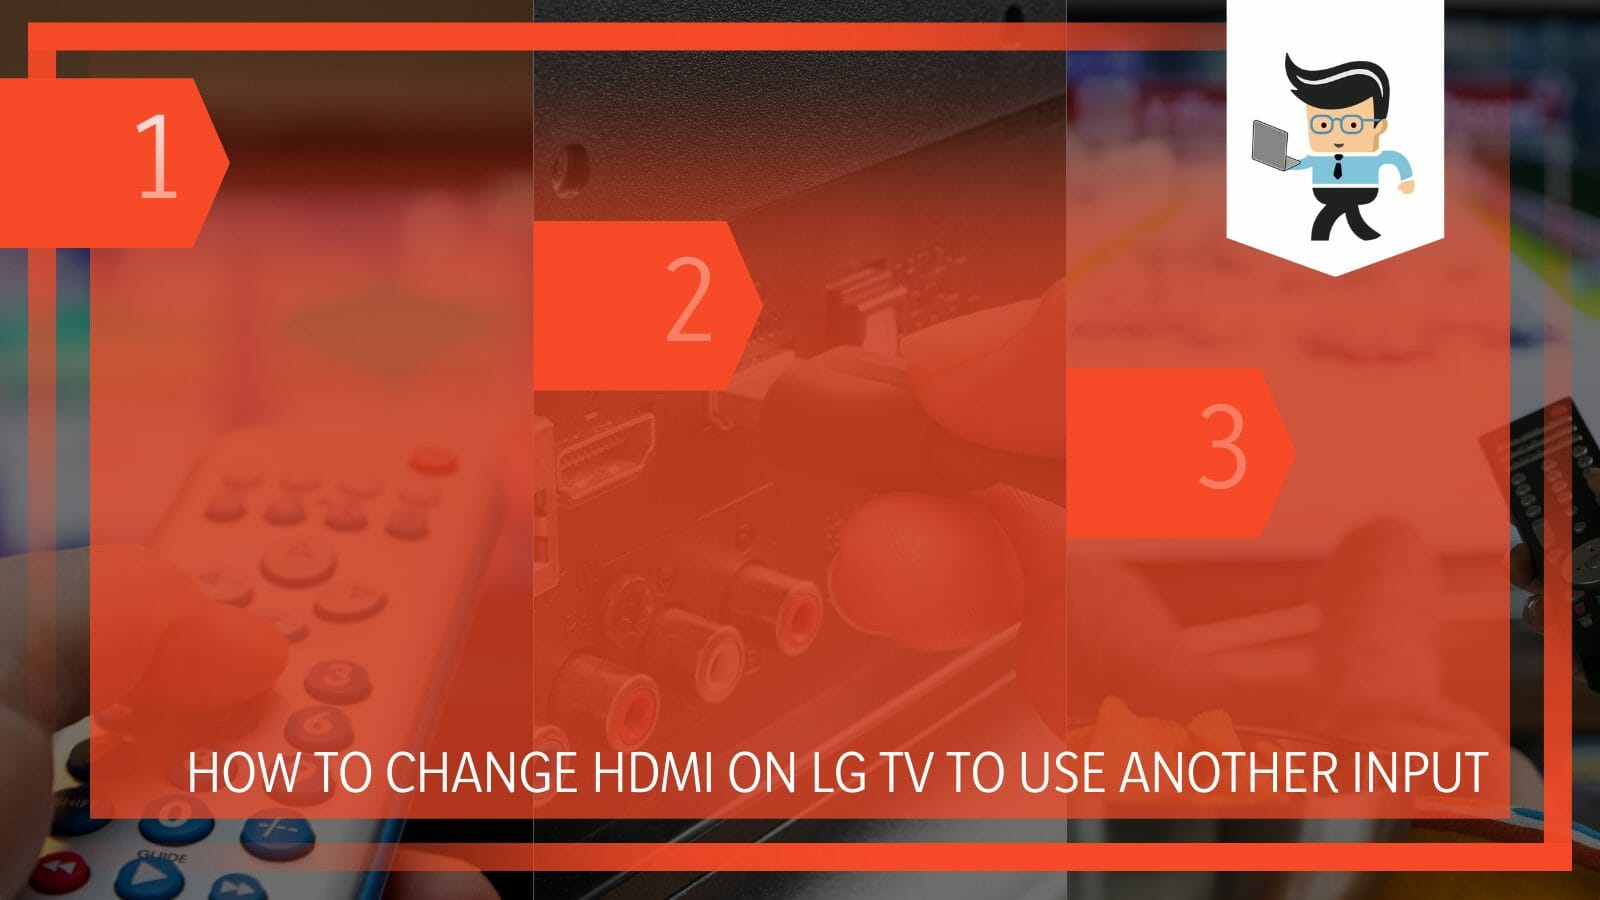 Change HDMI on LG TV To Use Another Input